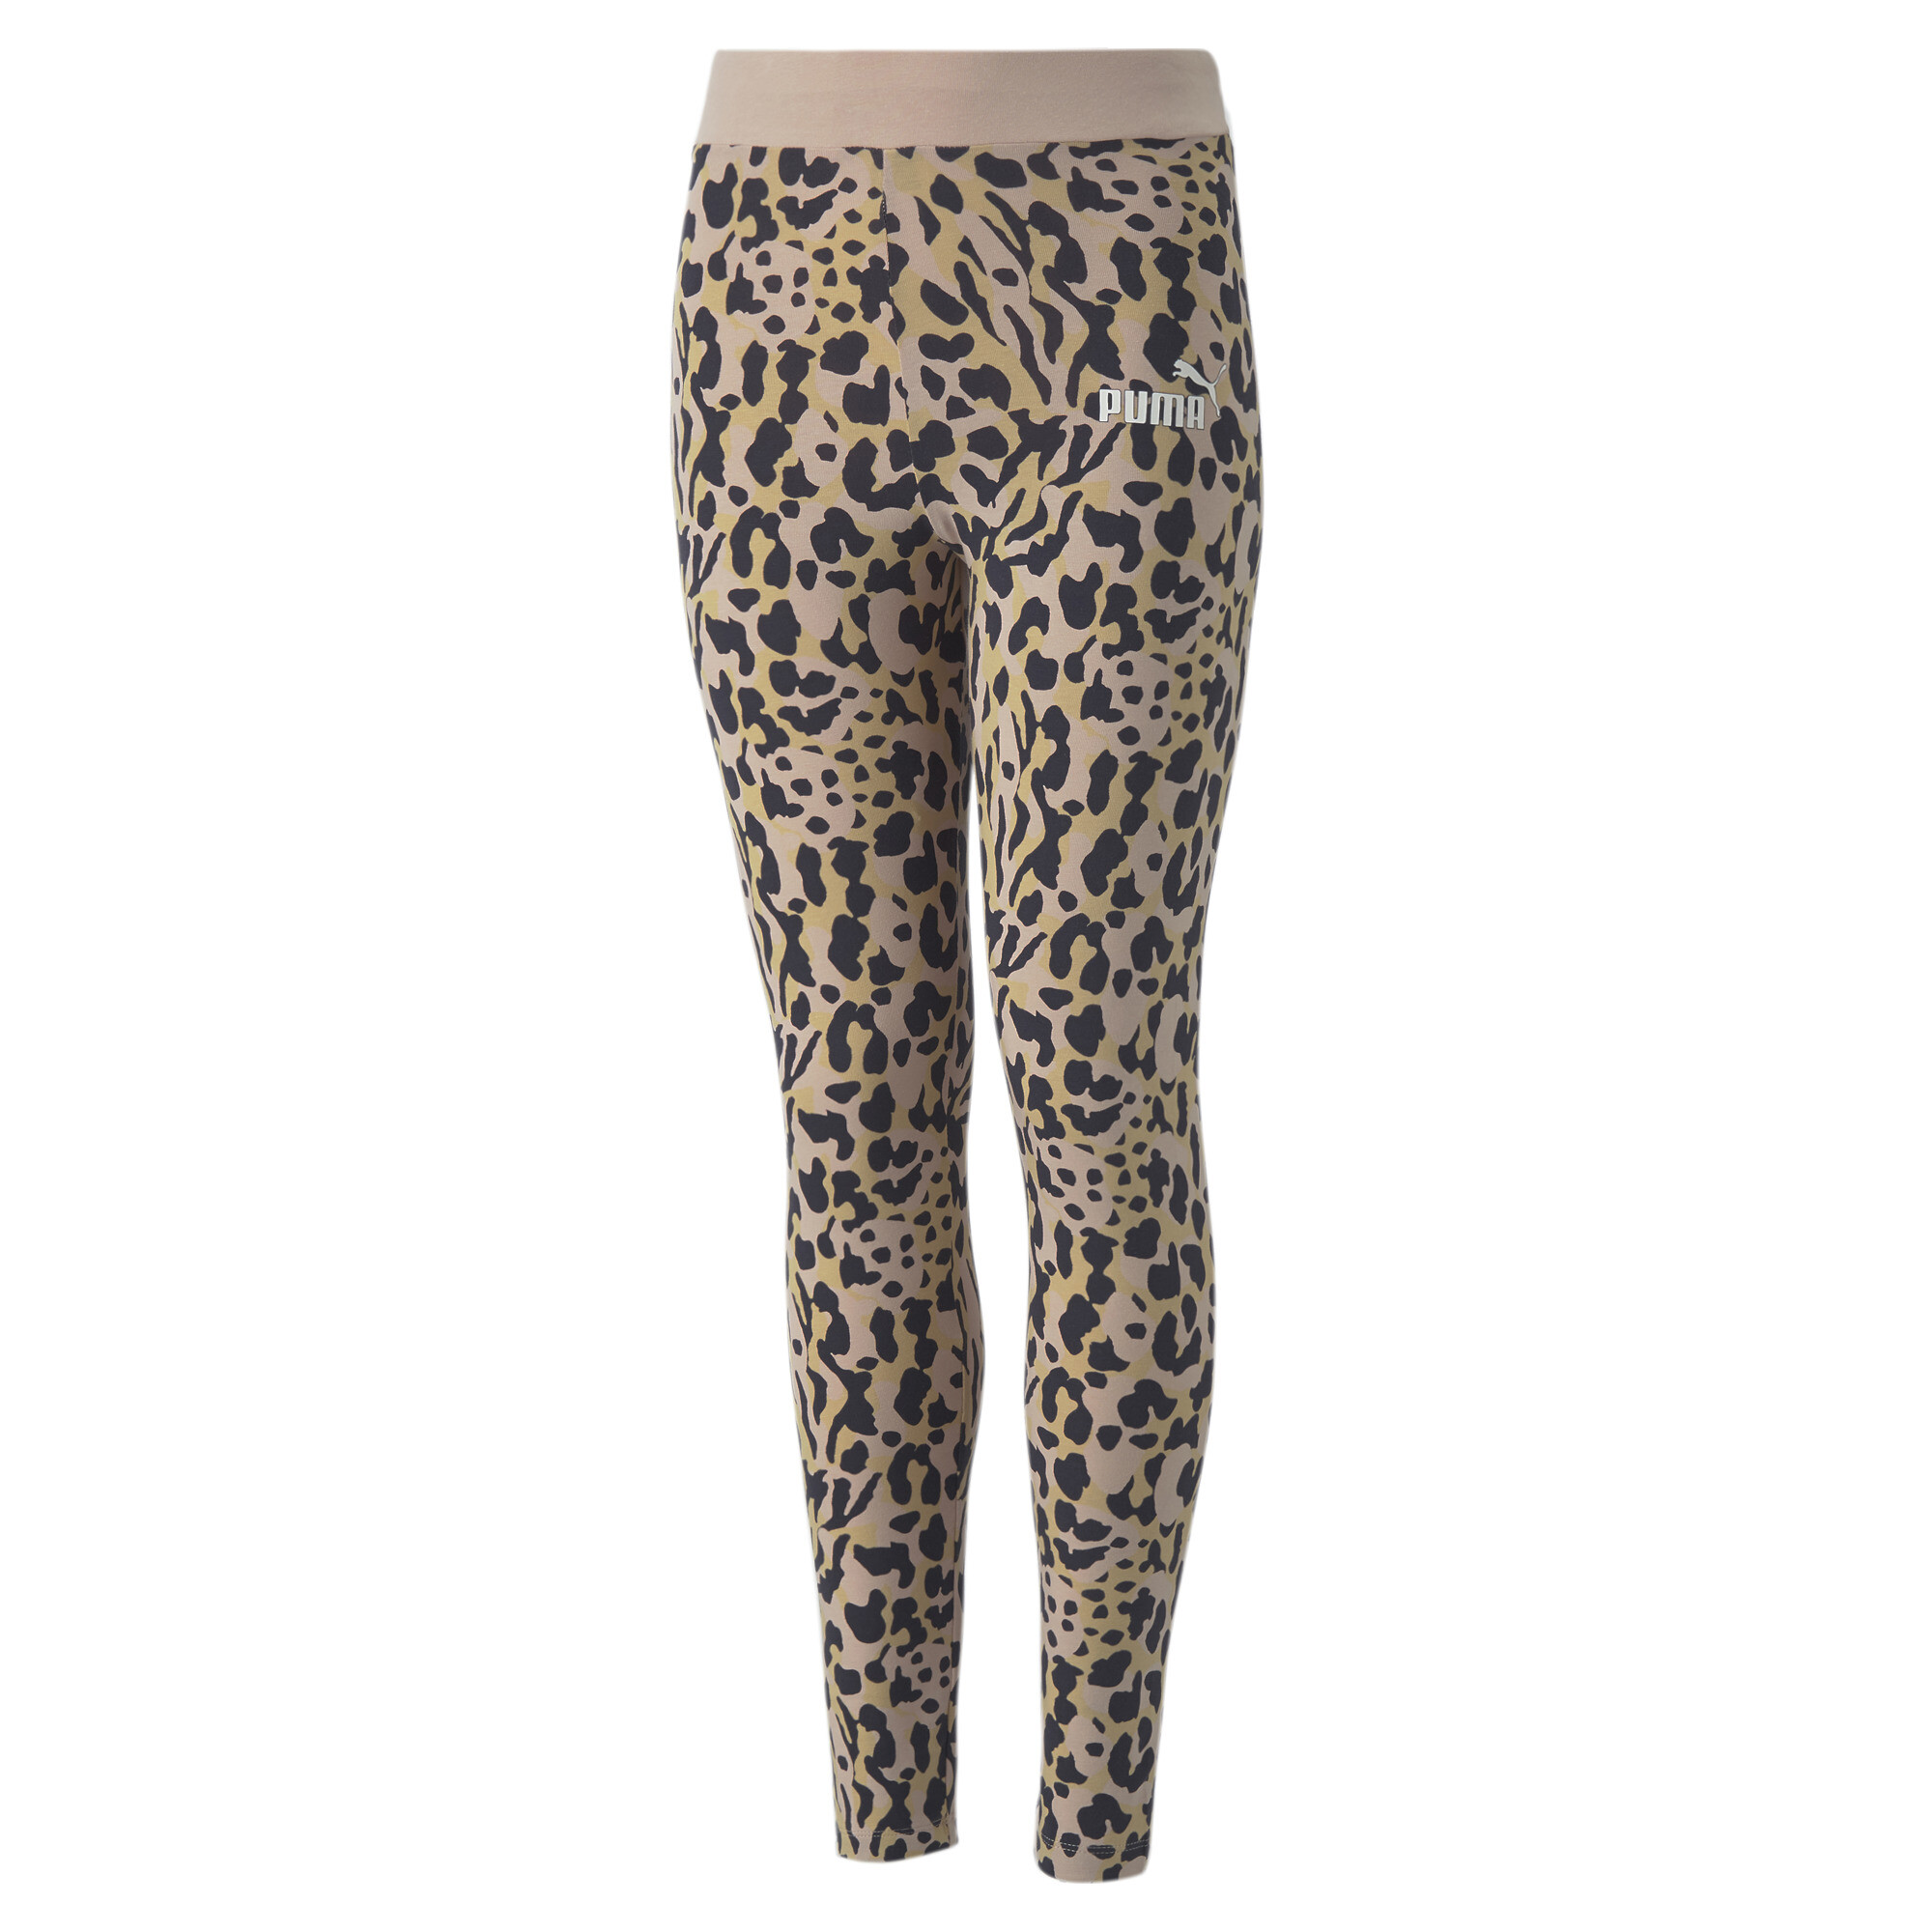 PUMA Alpha Printed Leggings In Pink, Size 13-14 Youth